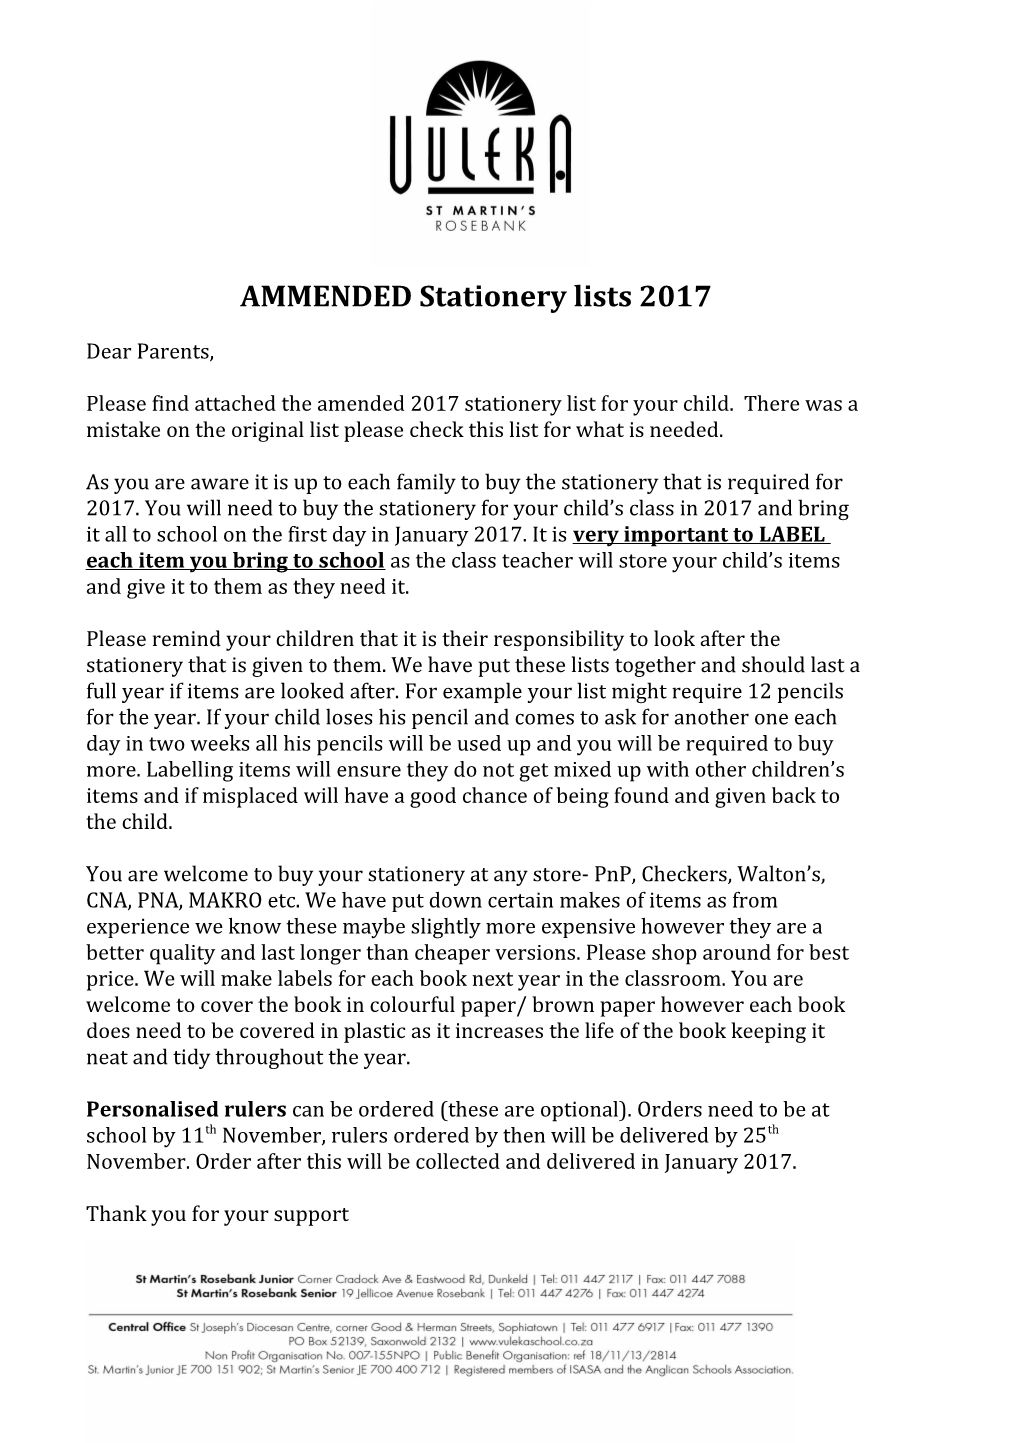 AMMENDED Stationery Lists 2017